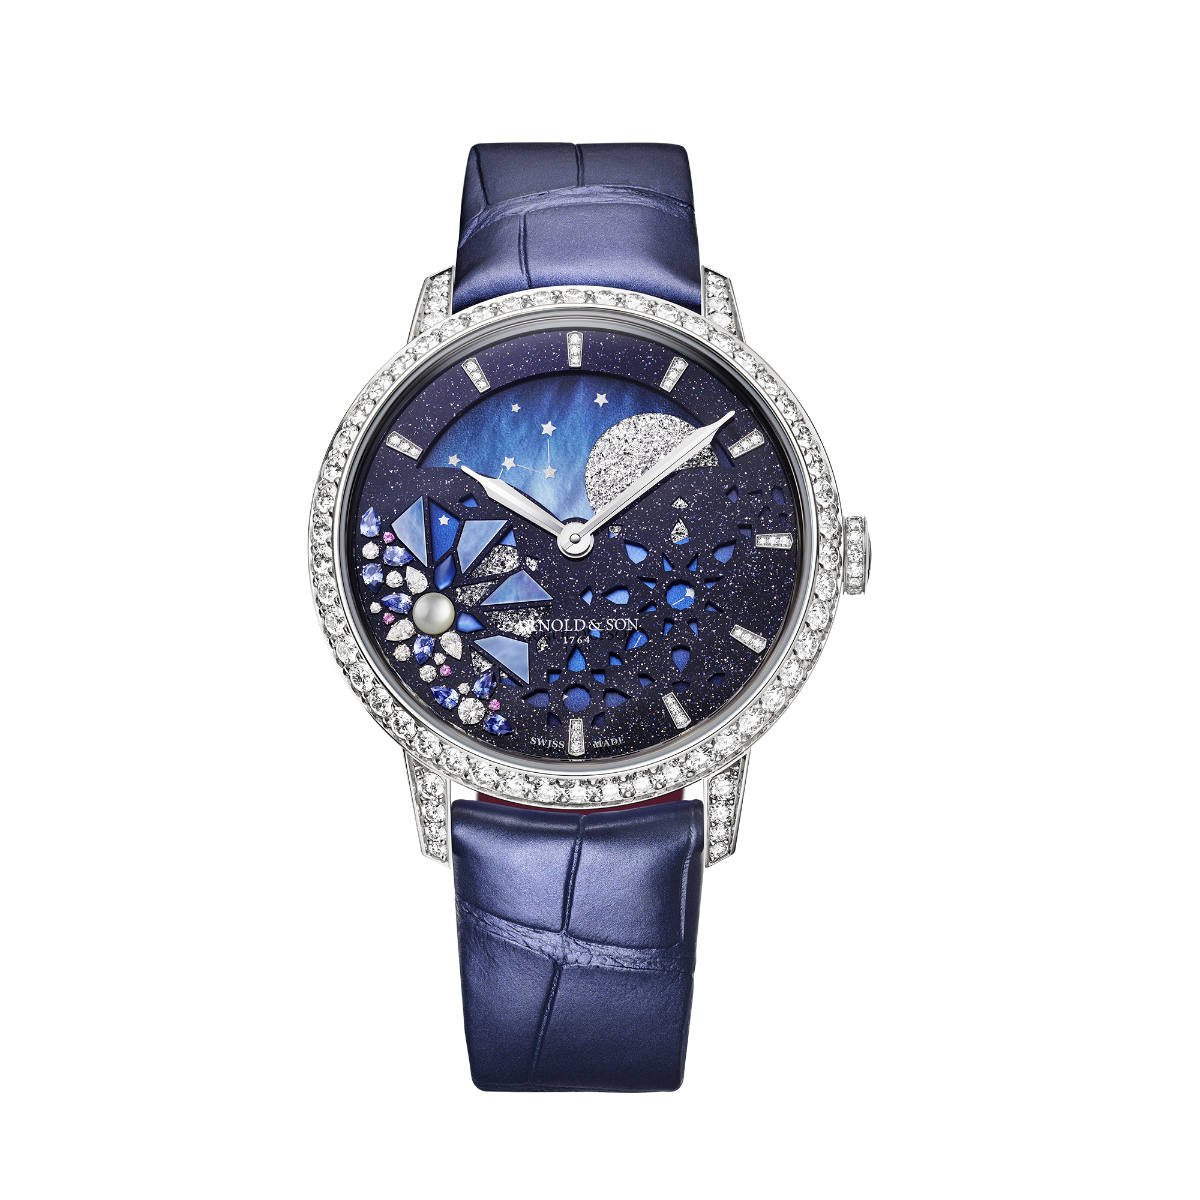 Arnold & Son Presents Its New Perpetual Moon 38 Eclipse I Watch